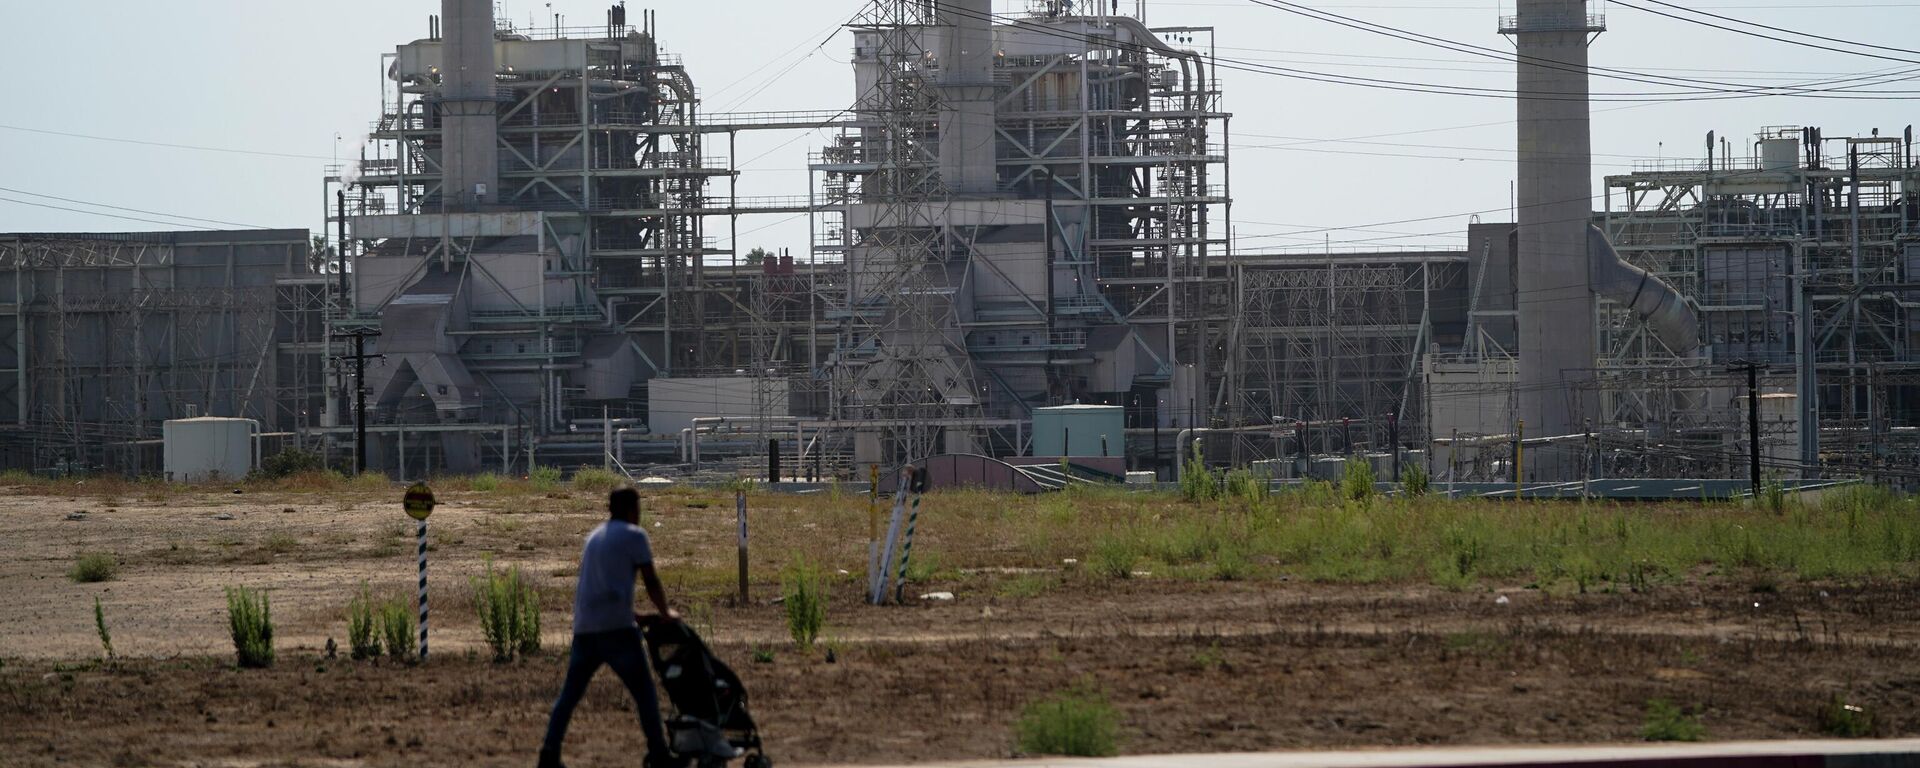 FILE - A man pushes a stroller near the AES power plant in Redondo Beach, Calif., Wednesday, Sept. 7, 2022.  On Monday, Sept. 19, the world’s first public database of fossil fuel production, reserves and emissions launches.  It shows that the United States and Russia have enough fossil fuel reserves to exhaust the world’s remaining carbon budget to stay under 1.5 degrees Celsius warming. (AP Photo/Jae C. Hong, File) - Sputnik International, 1920, 05.10.2022